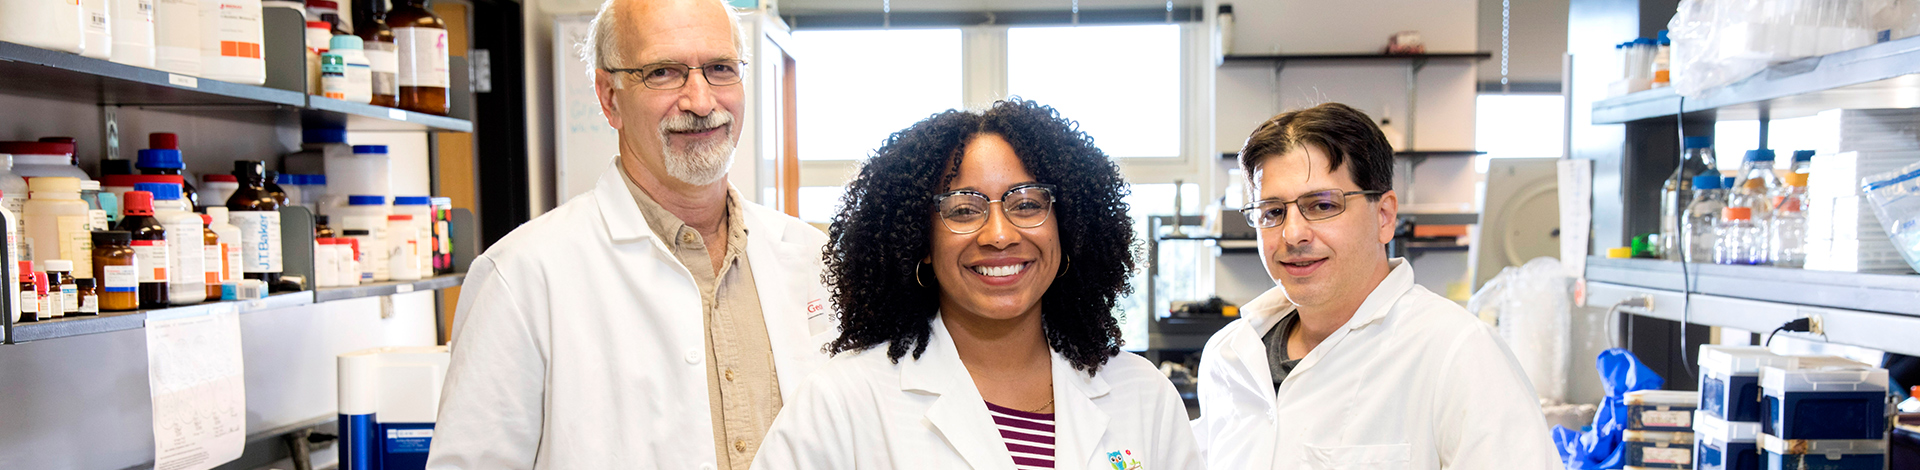 three researchers wearing white coats posing for camera